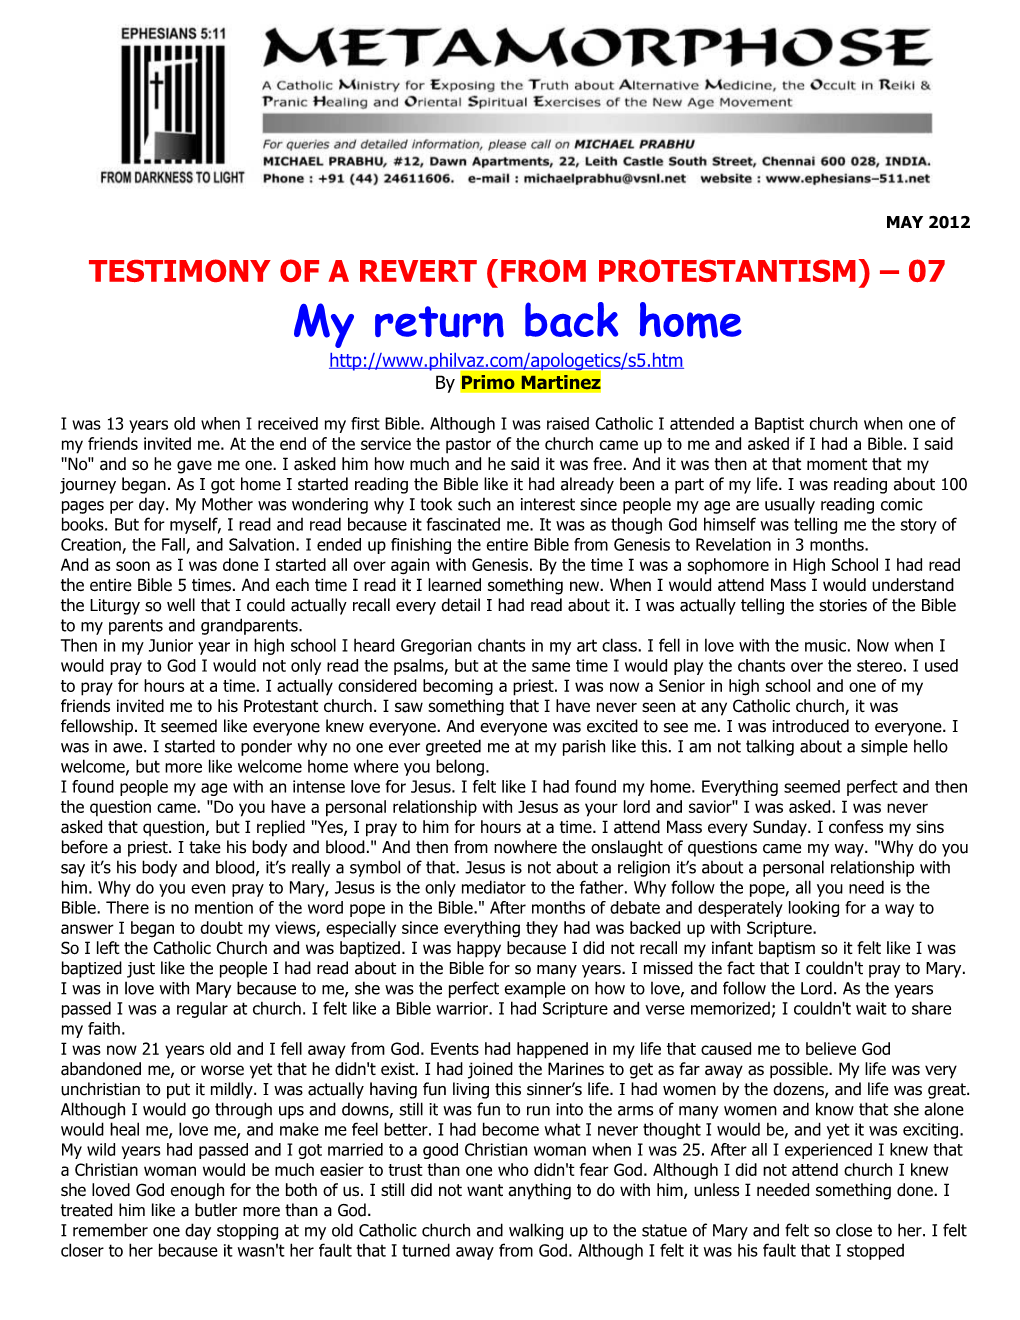 Testimony of a Revert (From Protestantism) 07